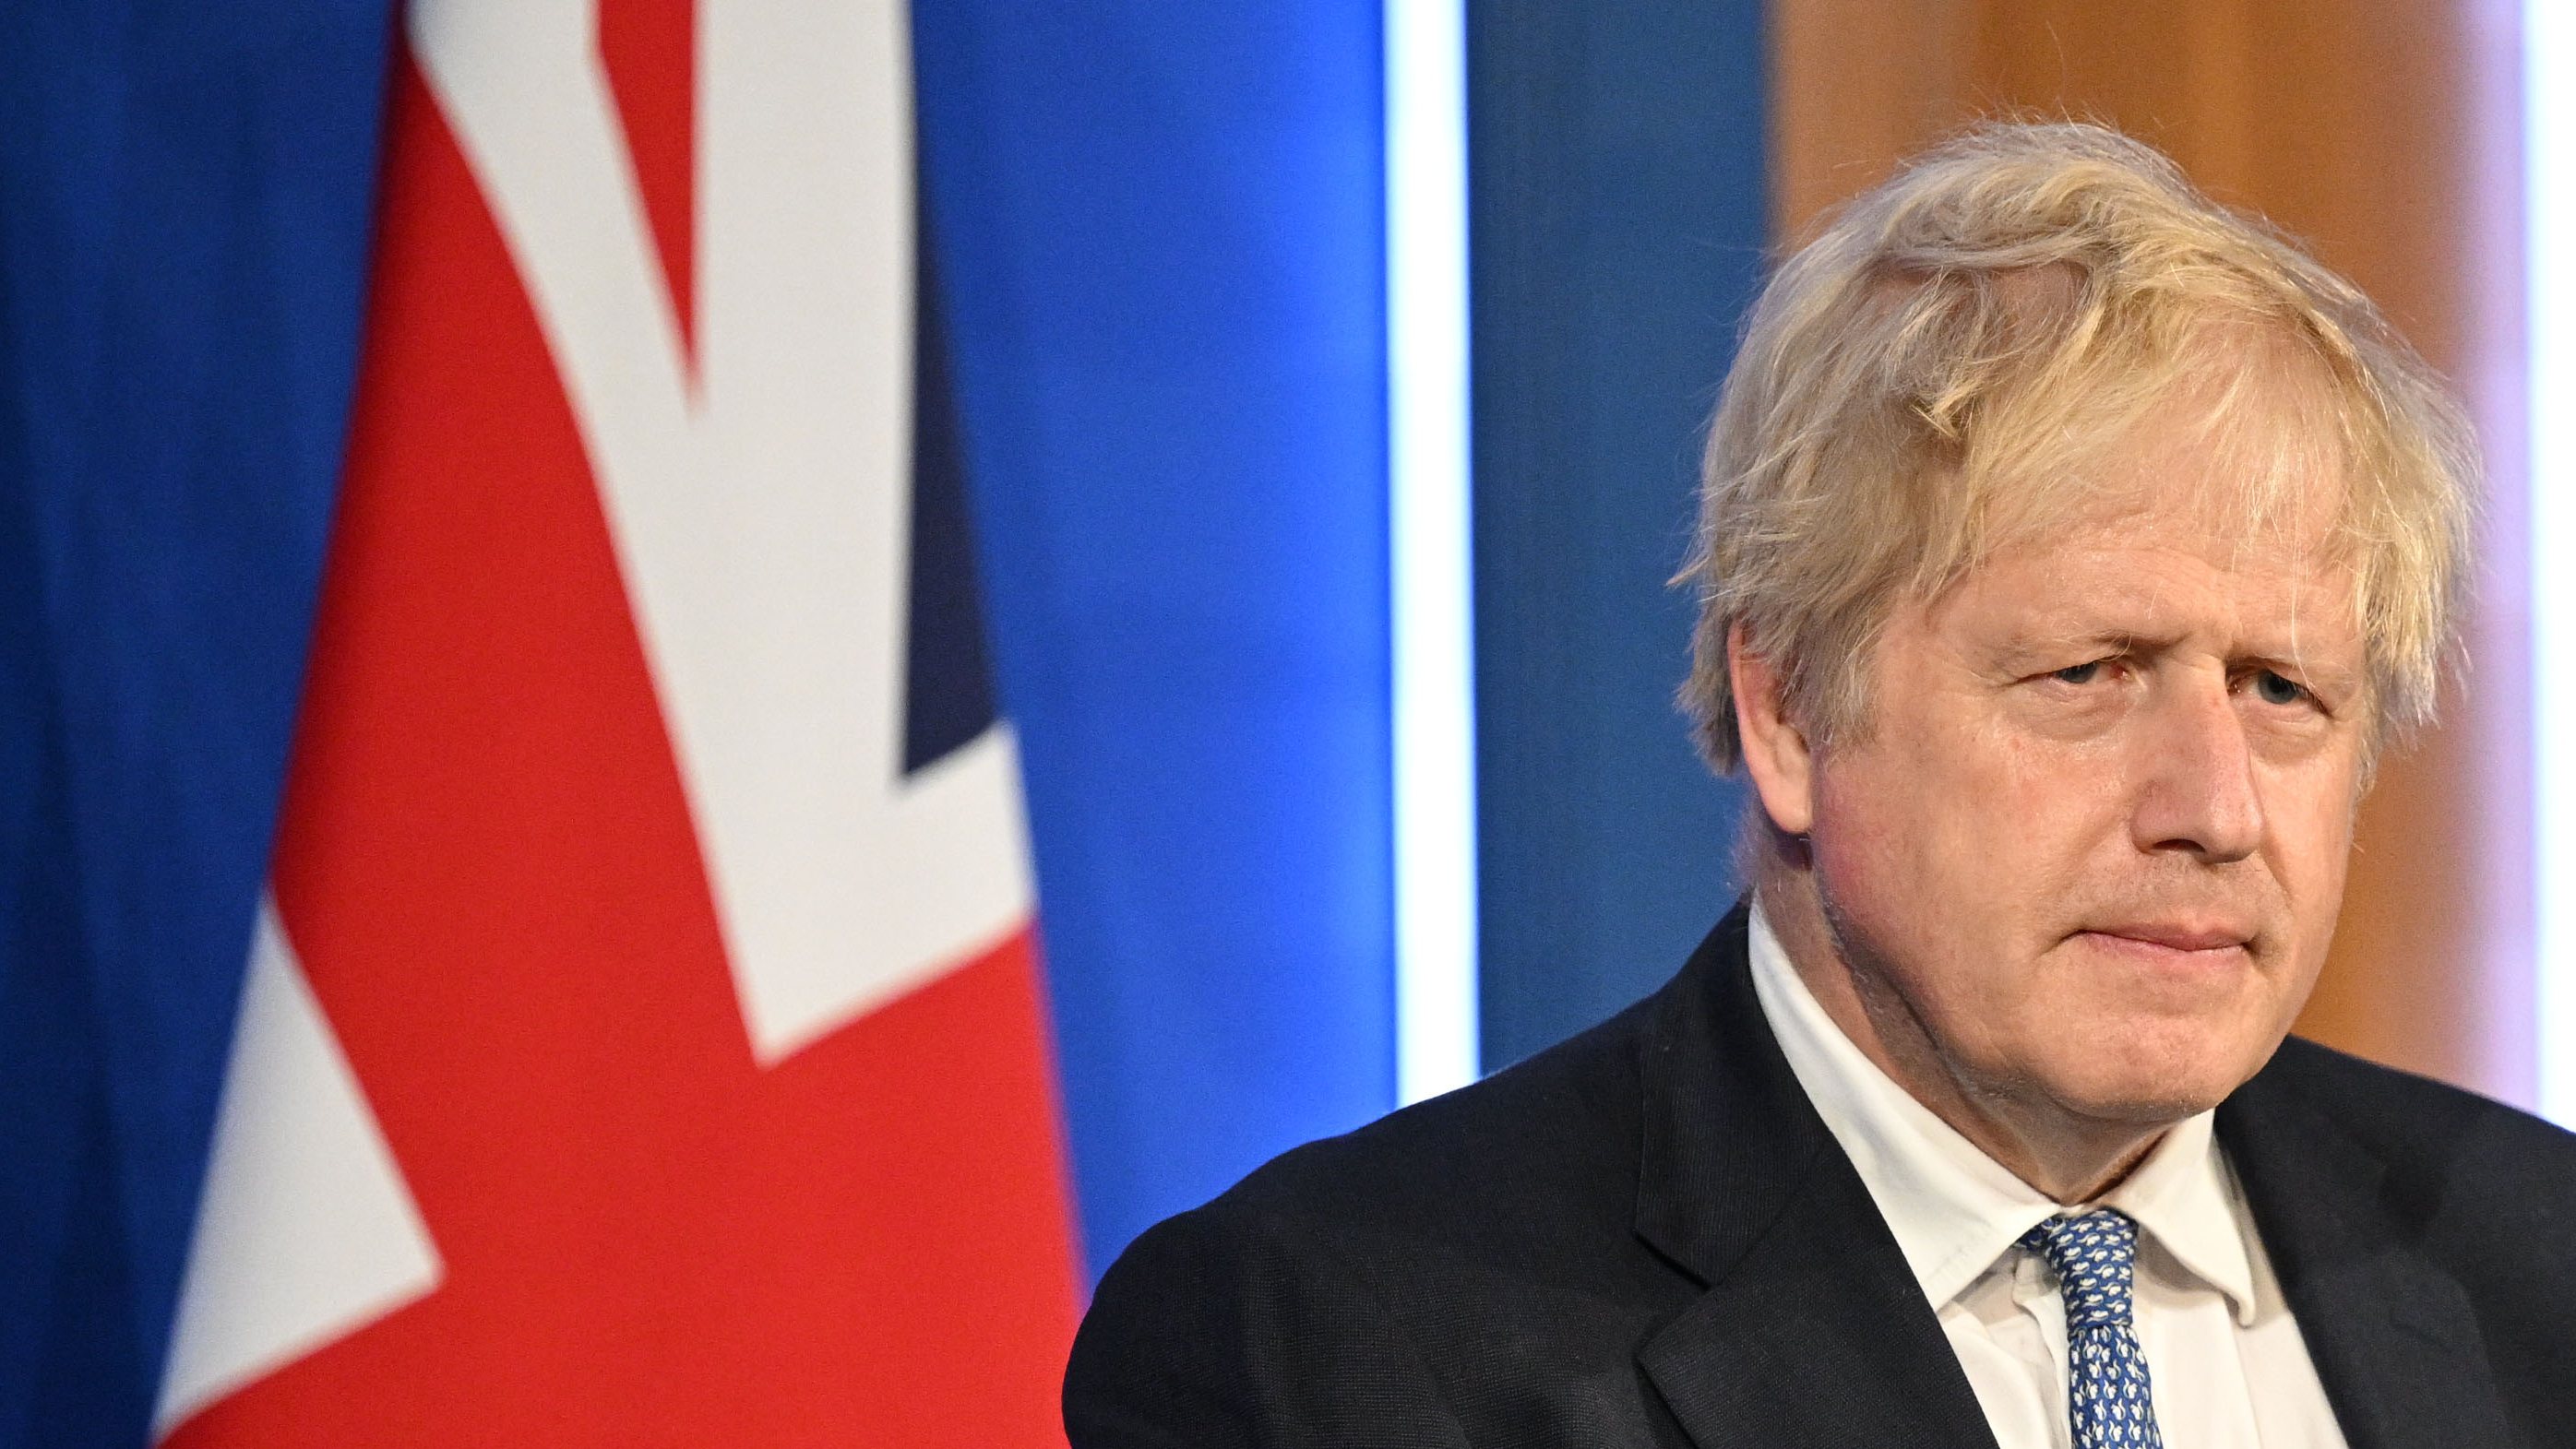 Boris Johnson Holds Press Conference On Publication Of The Sue Gray Report Into &quot;Partygate&quot;